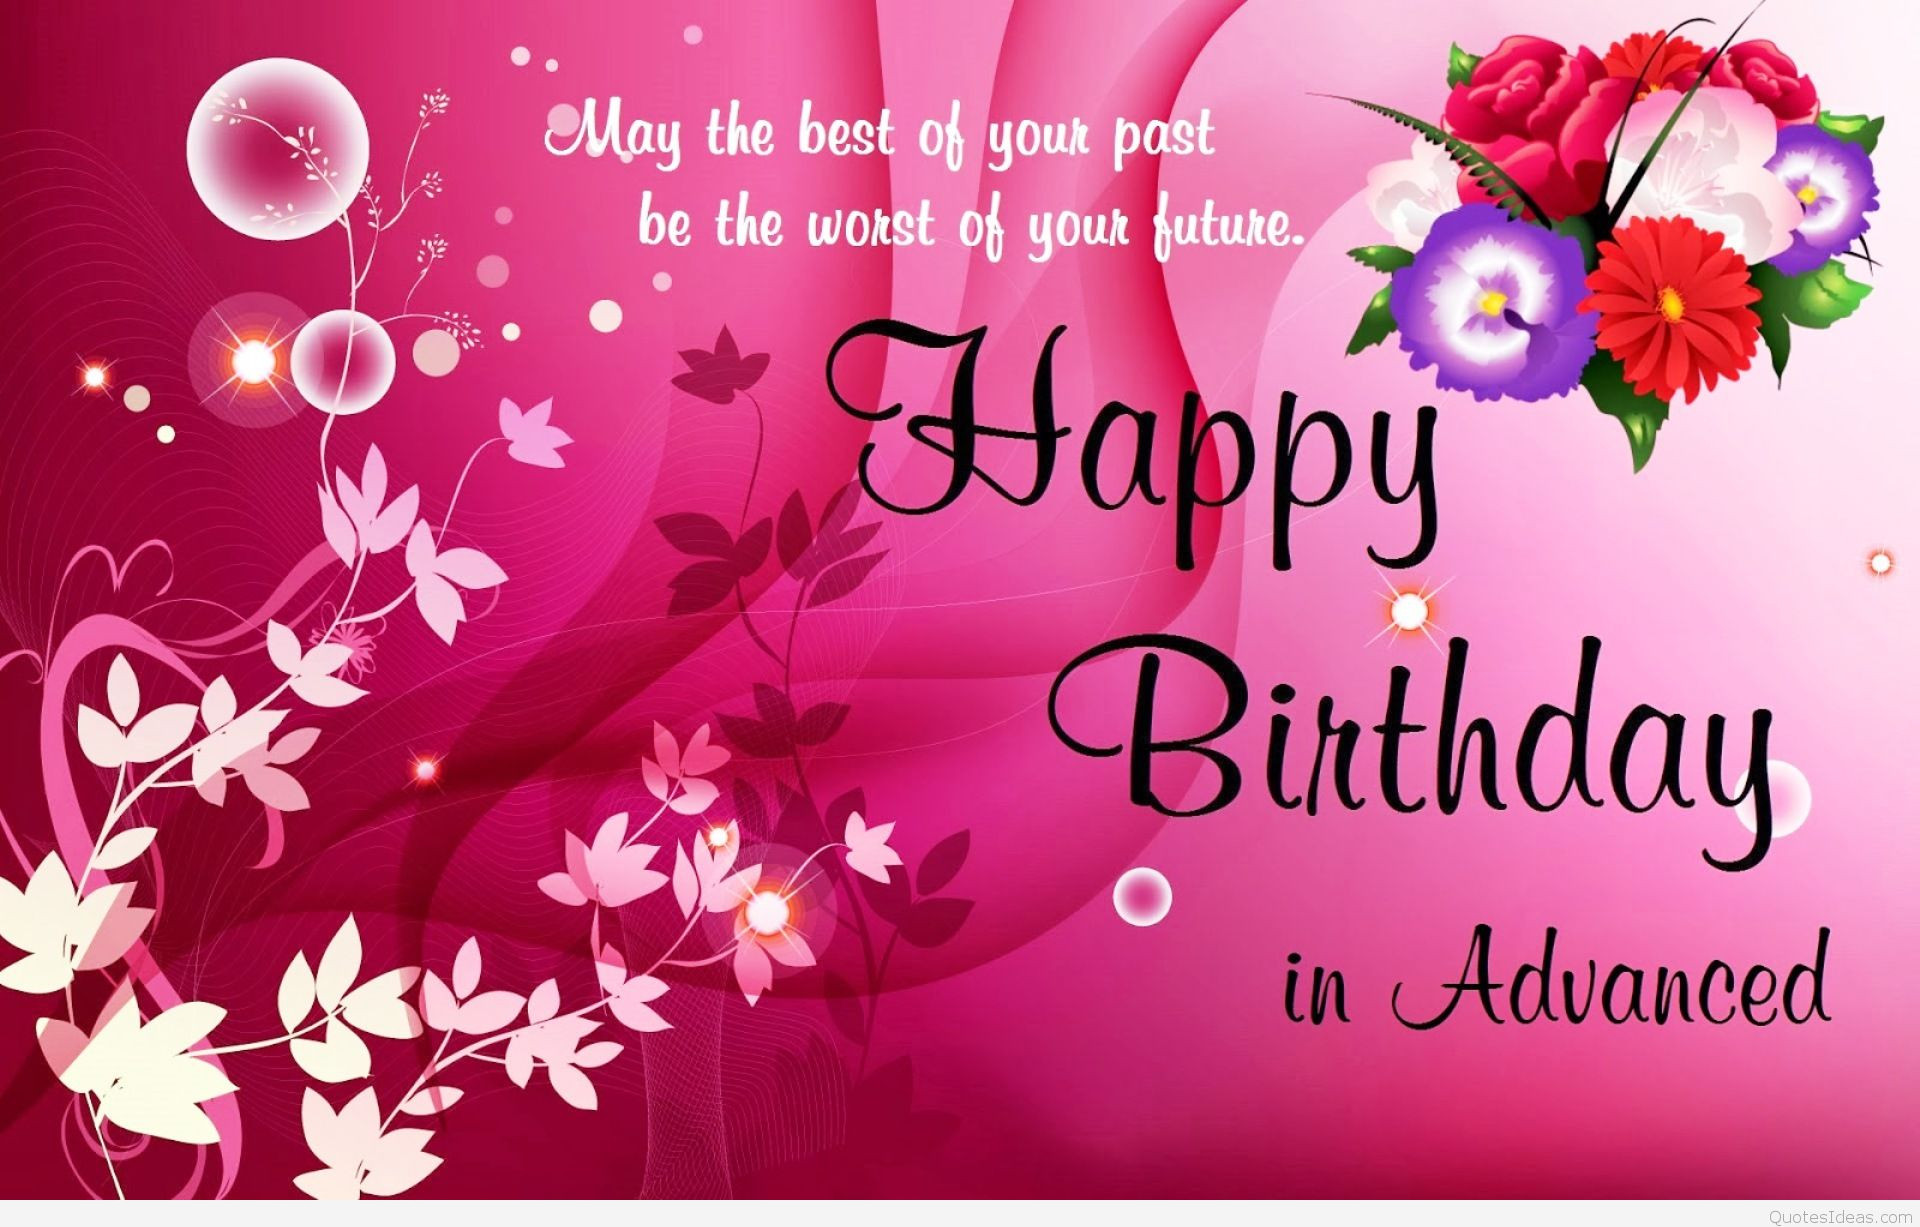 Cute Happy Birthday Quotes
 Cute background Happy Birthday sayings